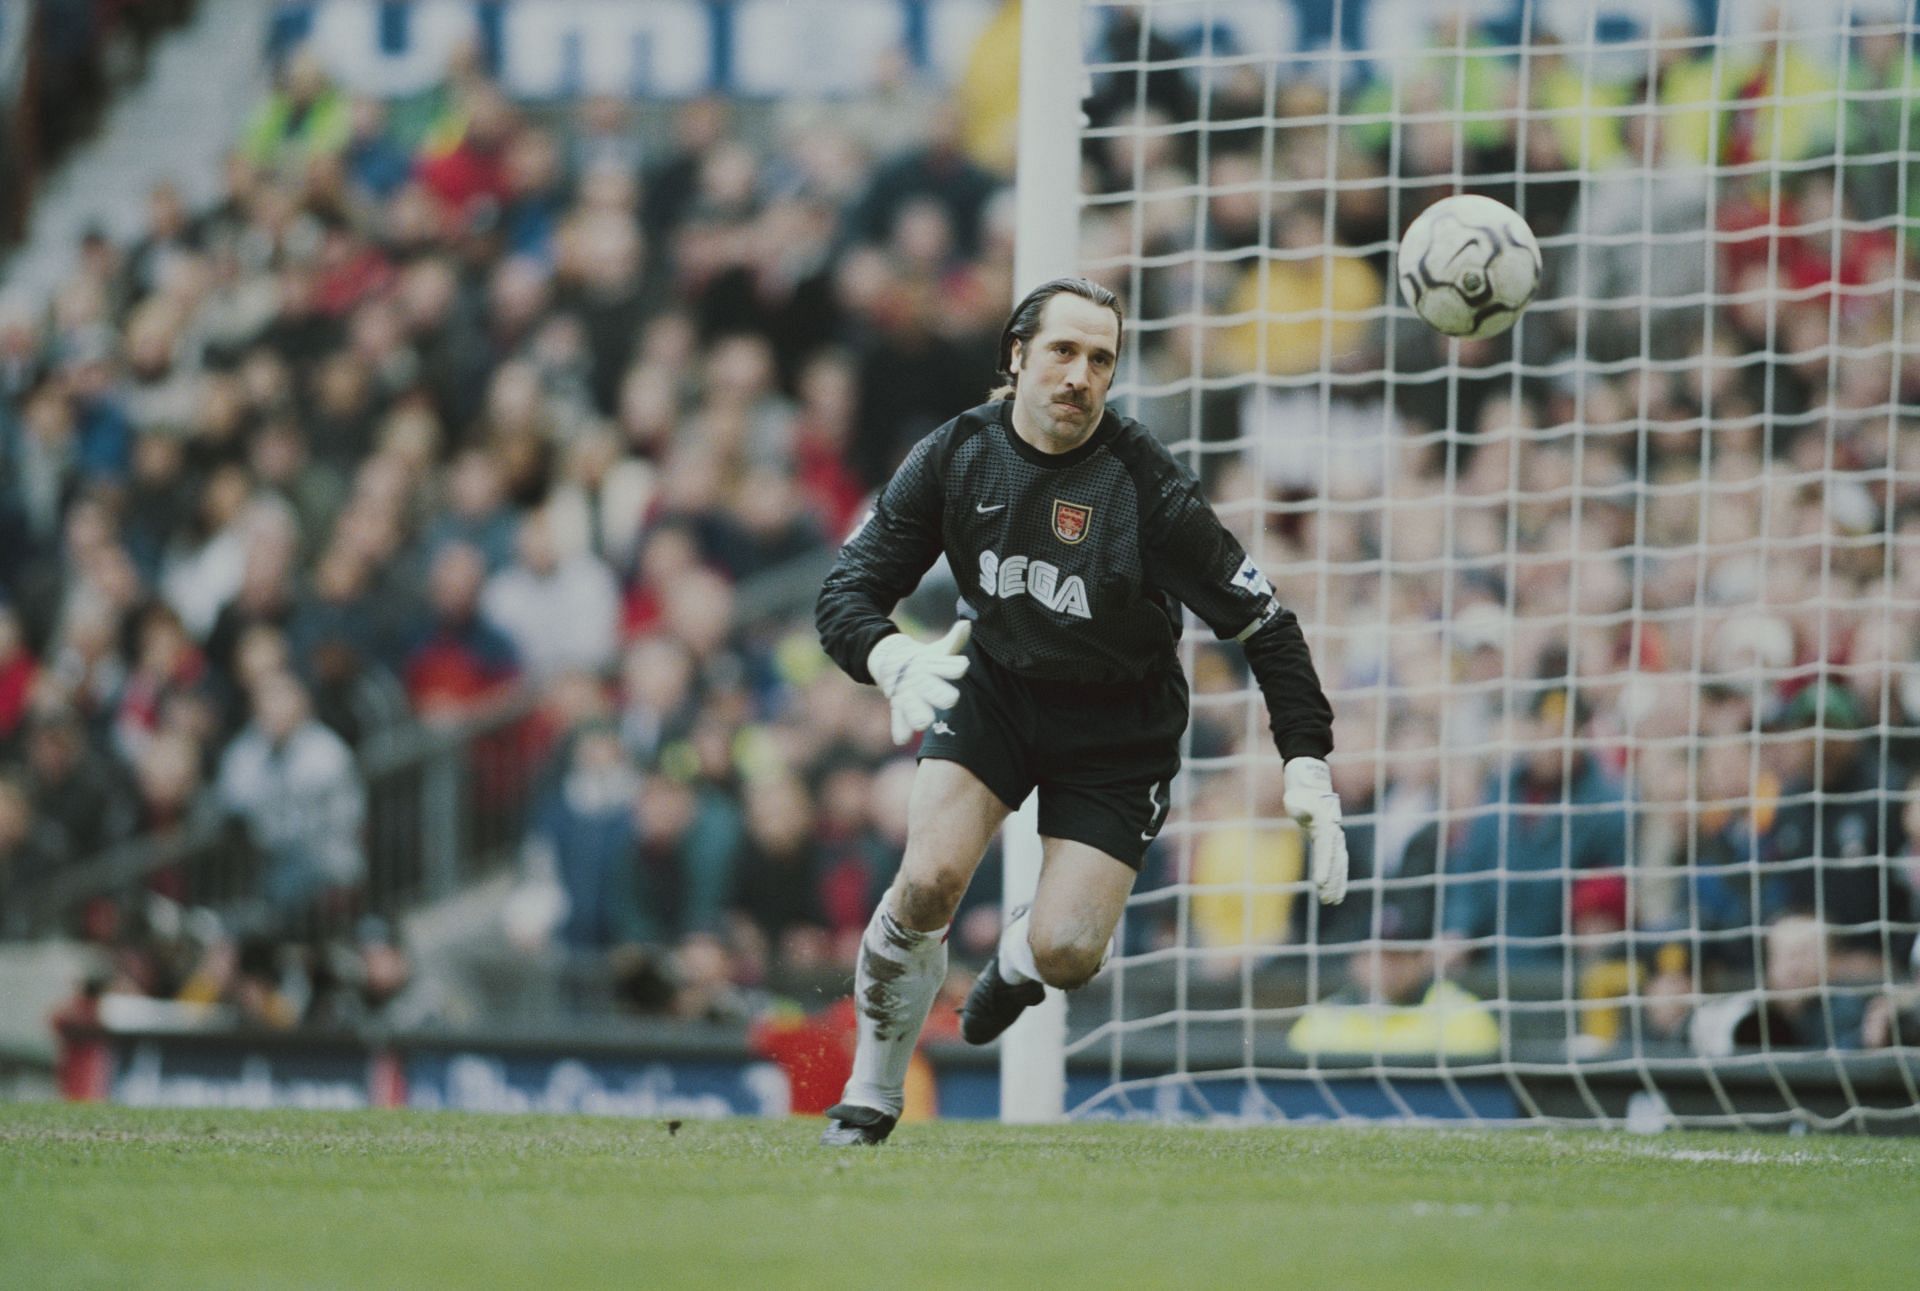 David Seaman was one of the greatest Premier League goalies in his prime